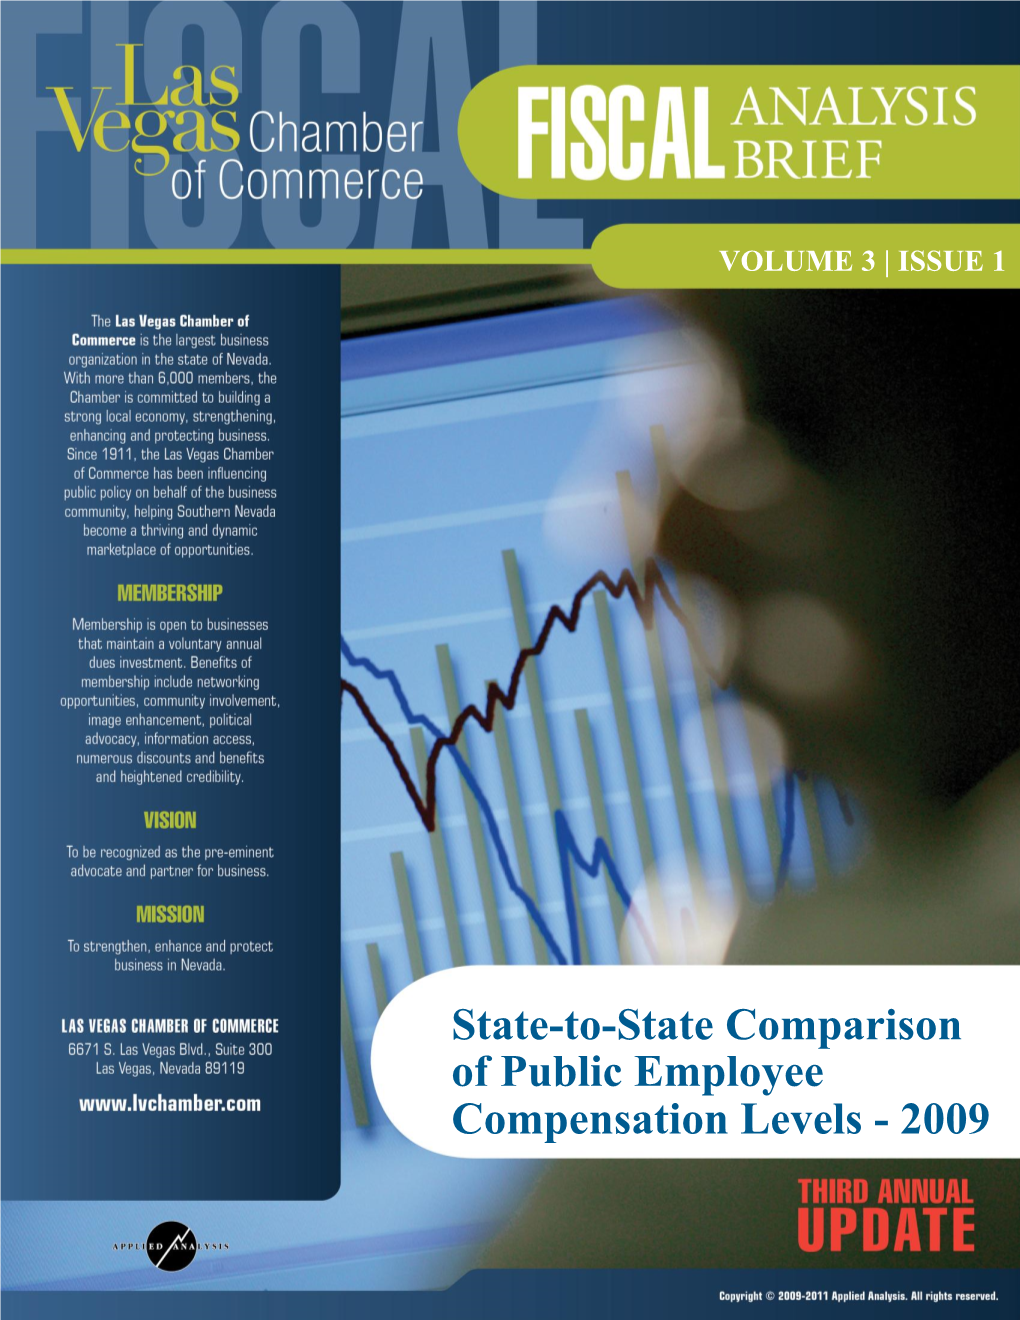 State-To-State Comparison of Public Employee Compensation Levels - 2009